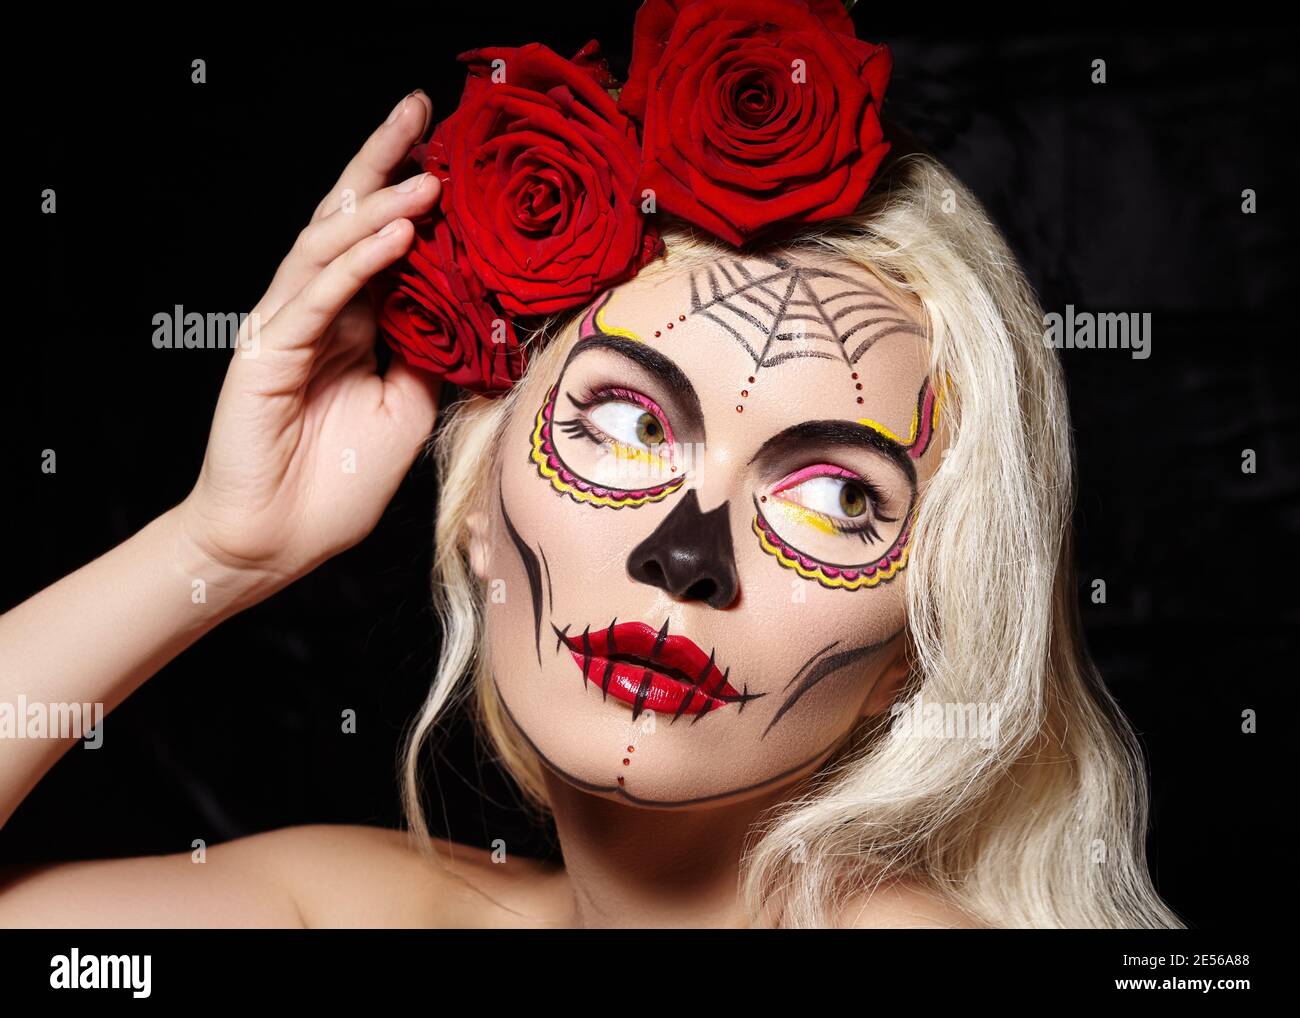 Beautiful Halloween Make-Up Style. Blond Model Wear Sugar Skull Makeup with Red Roses, pale Skin Tones and Waves Hair. Santa Muerte concept Stock Photo